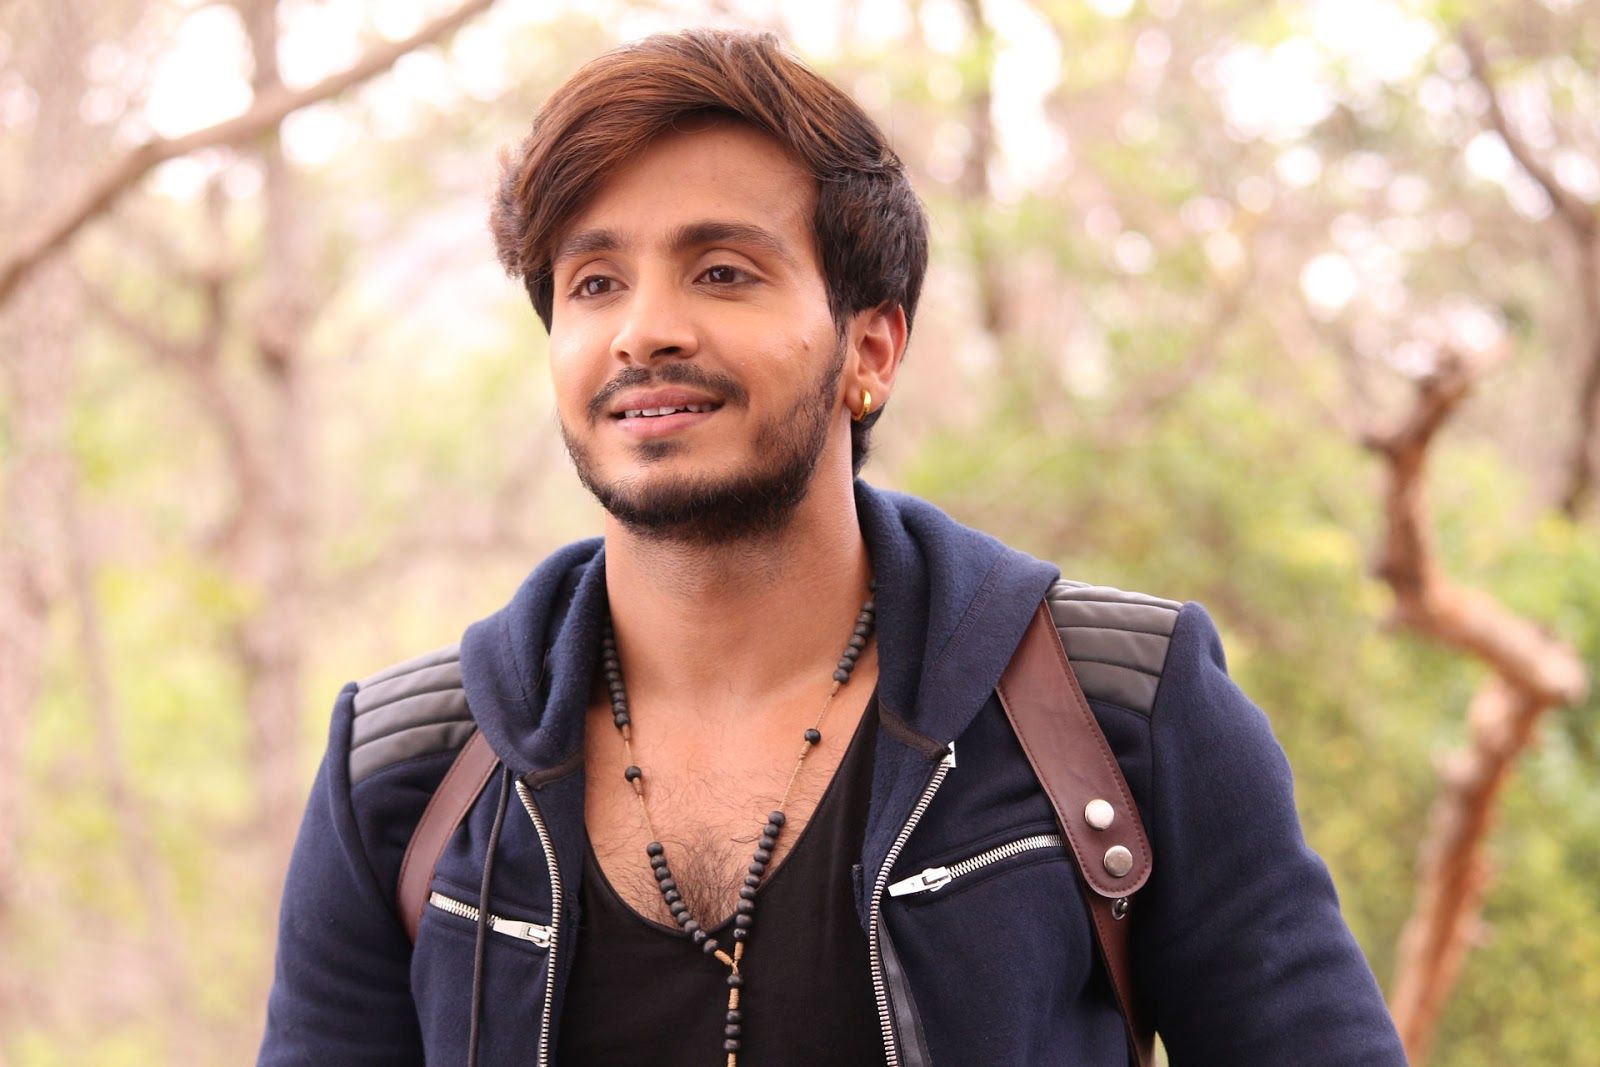 Param Singh Profile, Affairs, Contacts, Girlfriend, Gallery, News, HD Image wiki profile all celeb profiles tollywood, bollywood, kollywood, hollywood Go Profiles